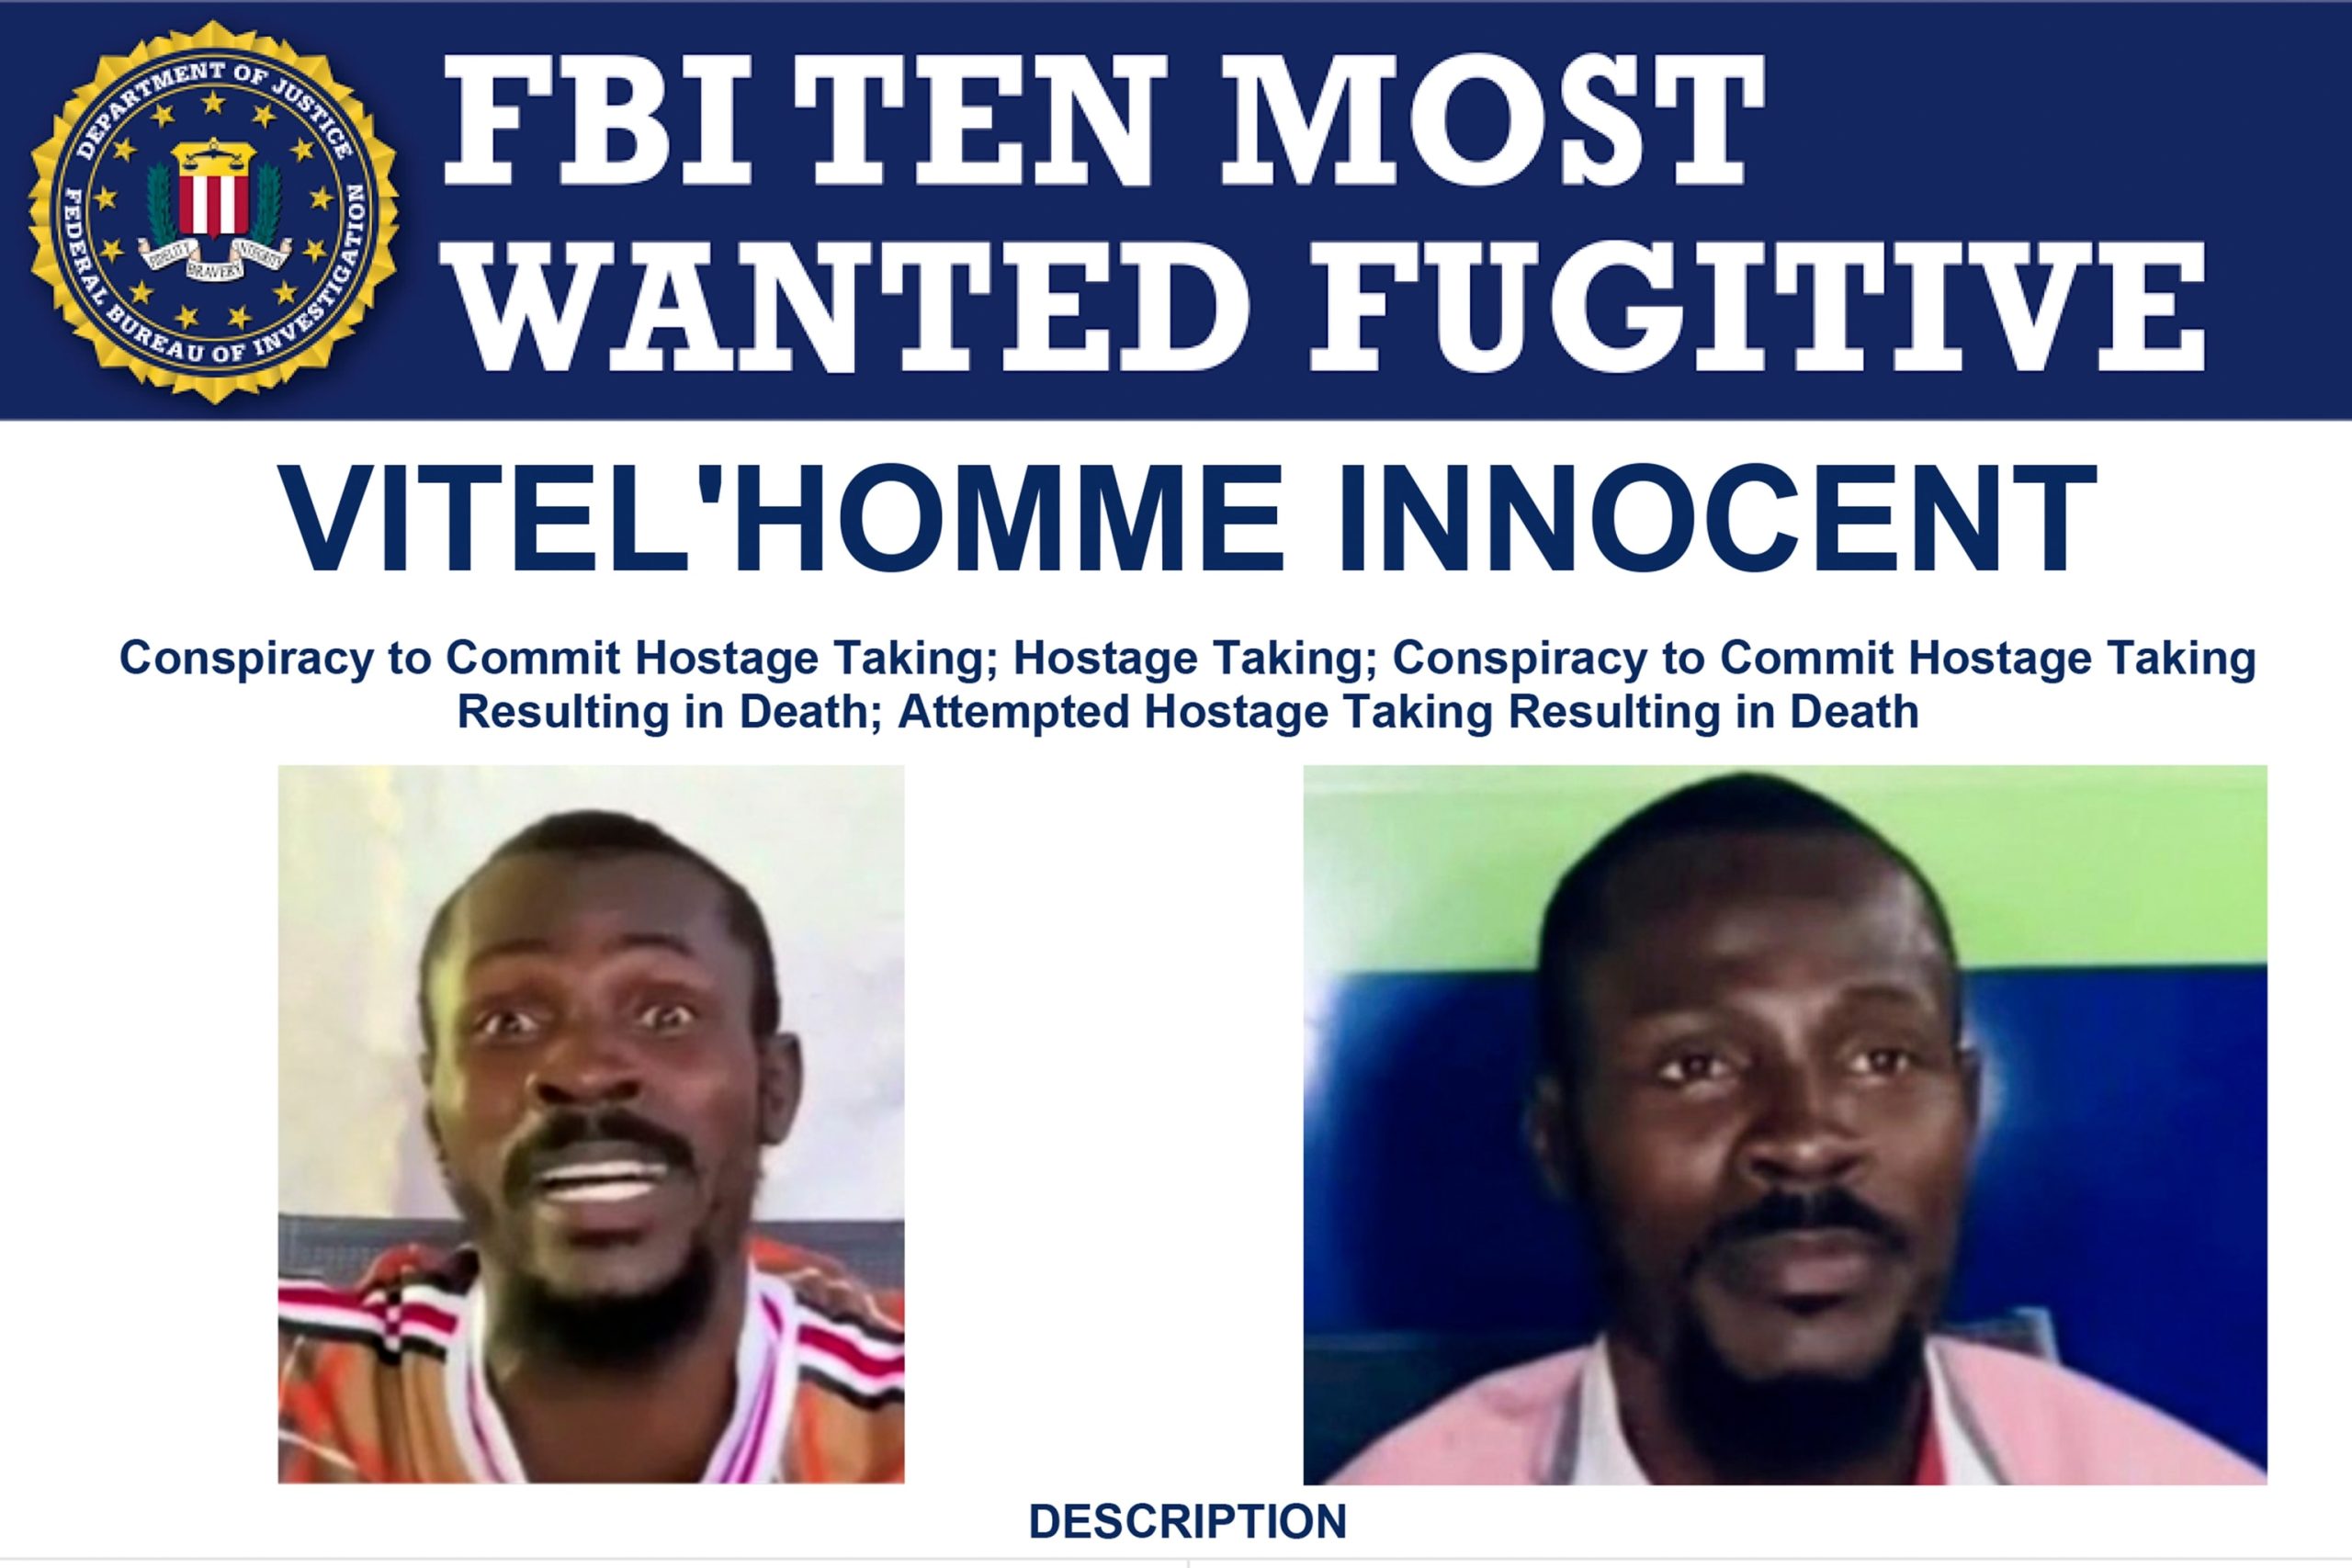 Haitian Gang Leader Suspected of Aiding in Kidnapping and Murder of Americans Now on FBI's Most Wanted Fugitives List